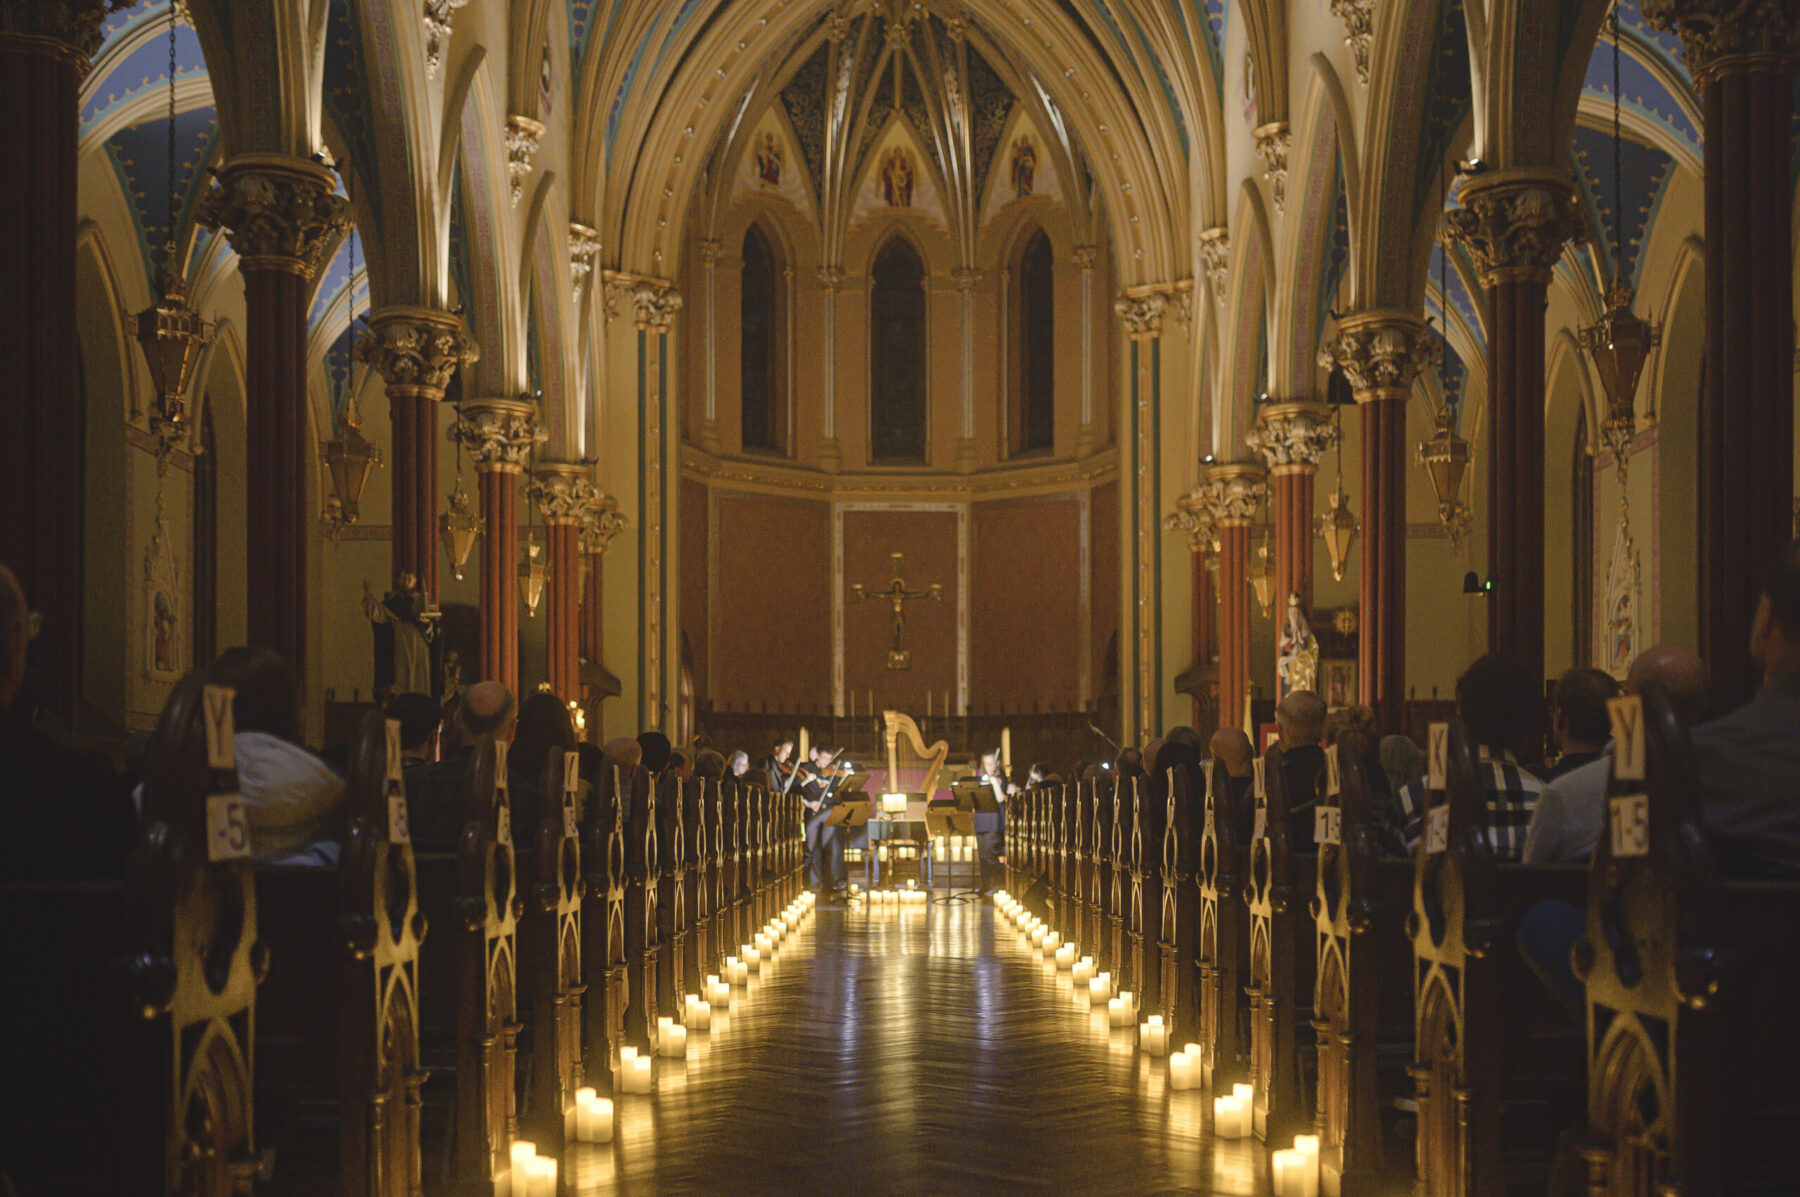 The aisle of St. Mary's church is lined with candles leading to the front of the church, where string musicians play surrounded by candlelight.